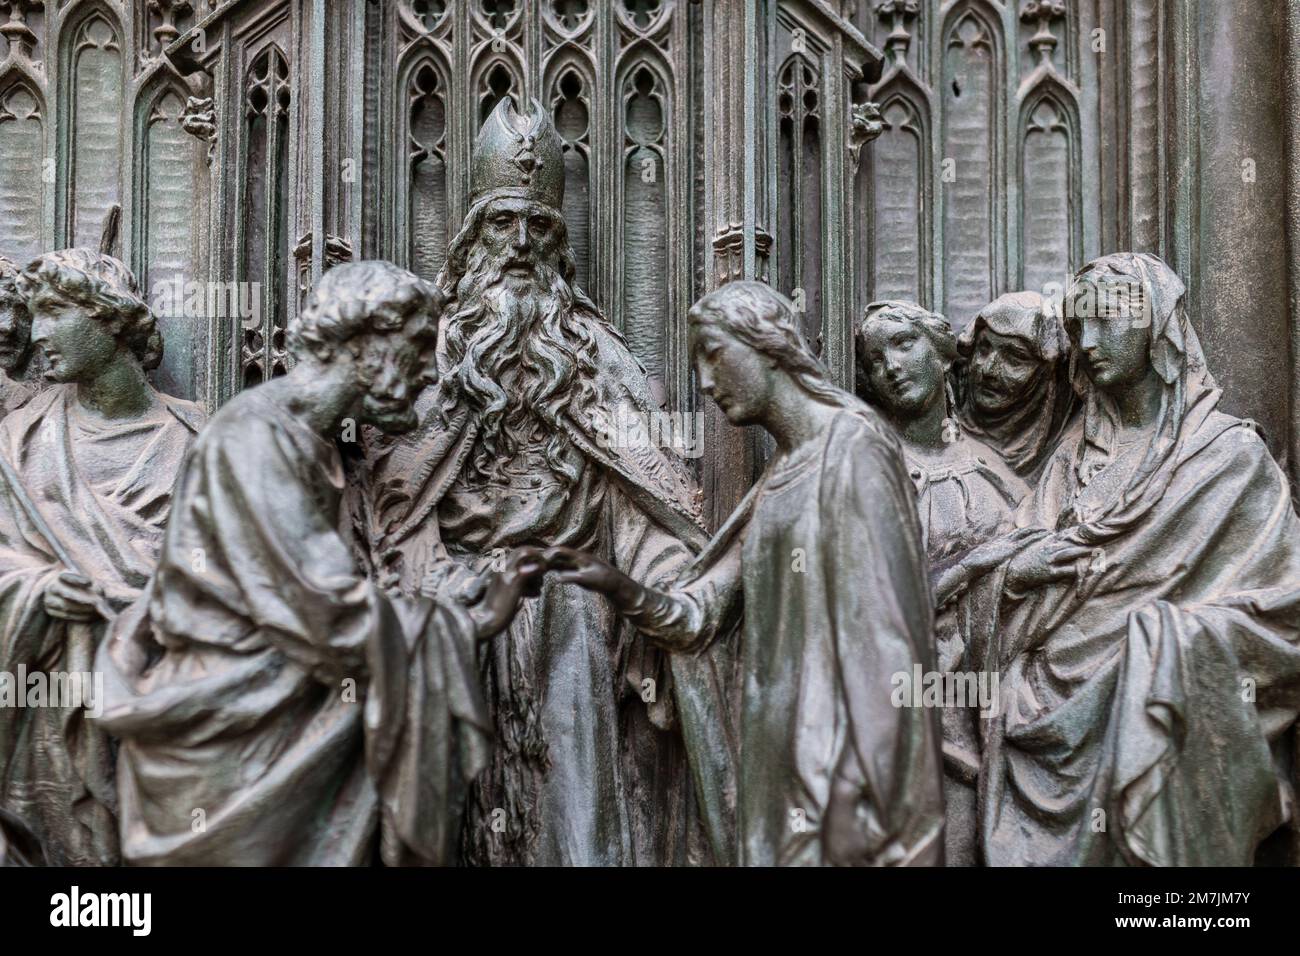 Exterior Sculpture Details of the Milan Cathedral (Duomo di Milano) in Milan, Italy Stock Photo